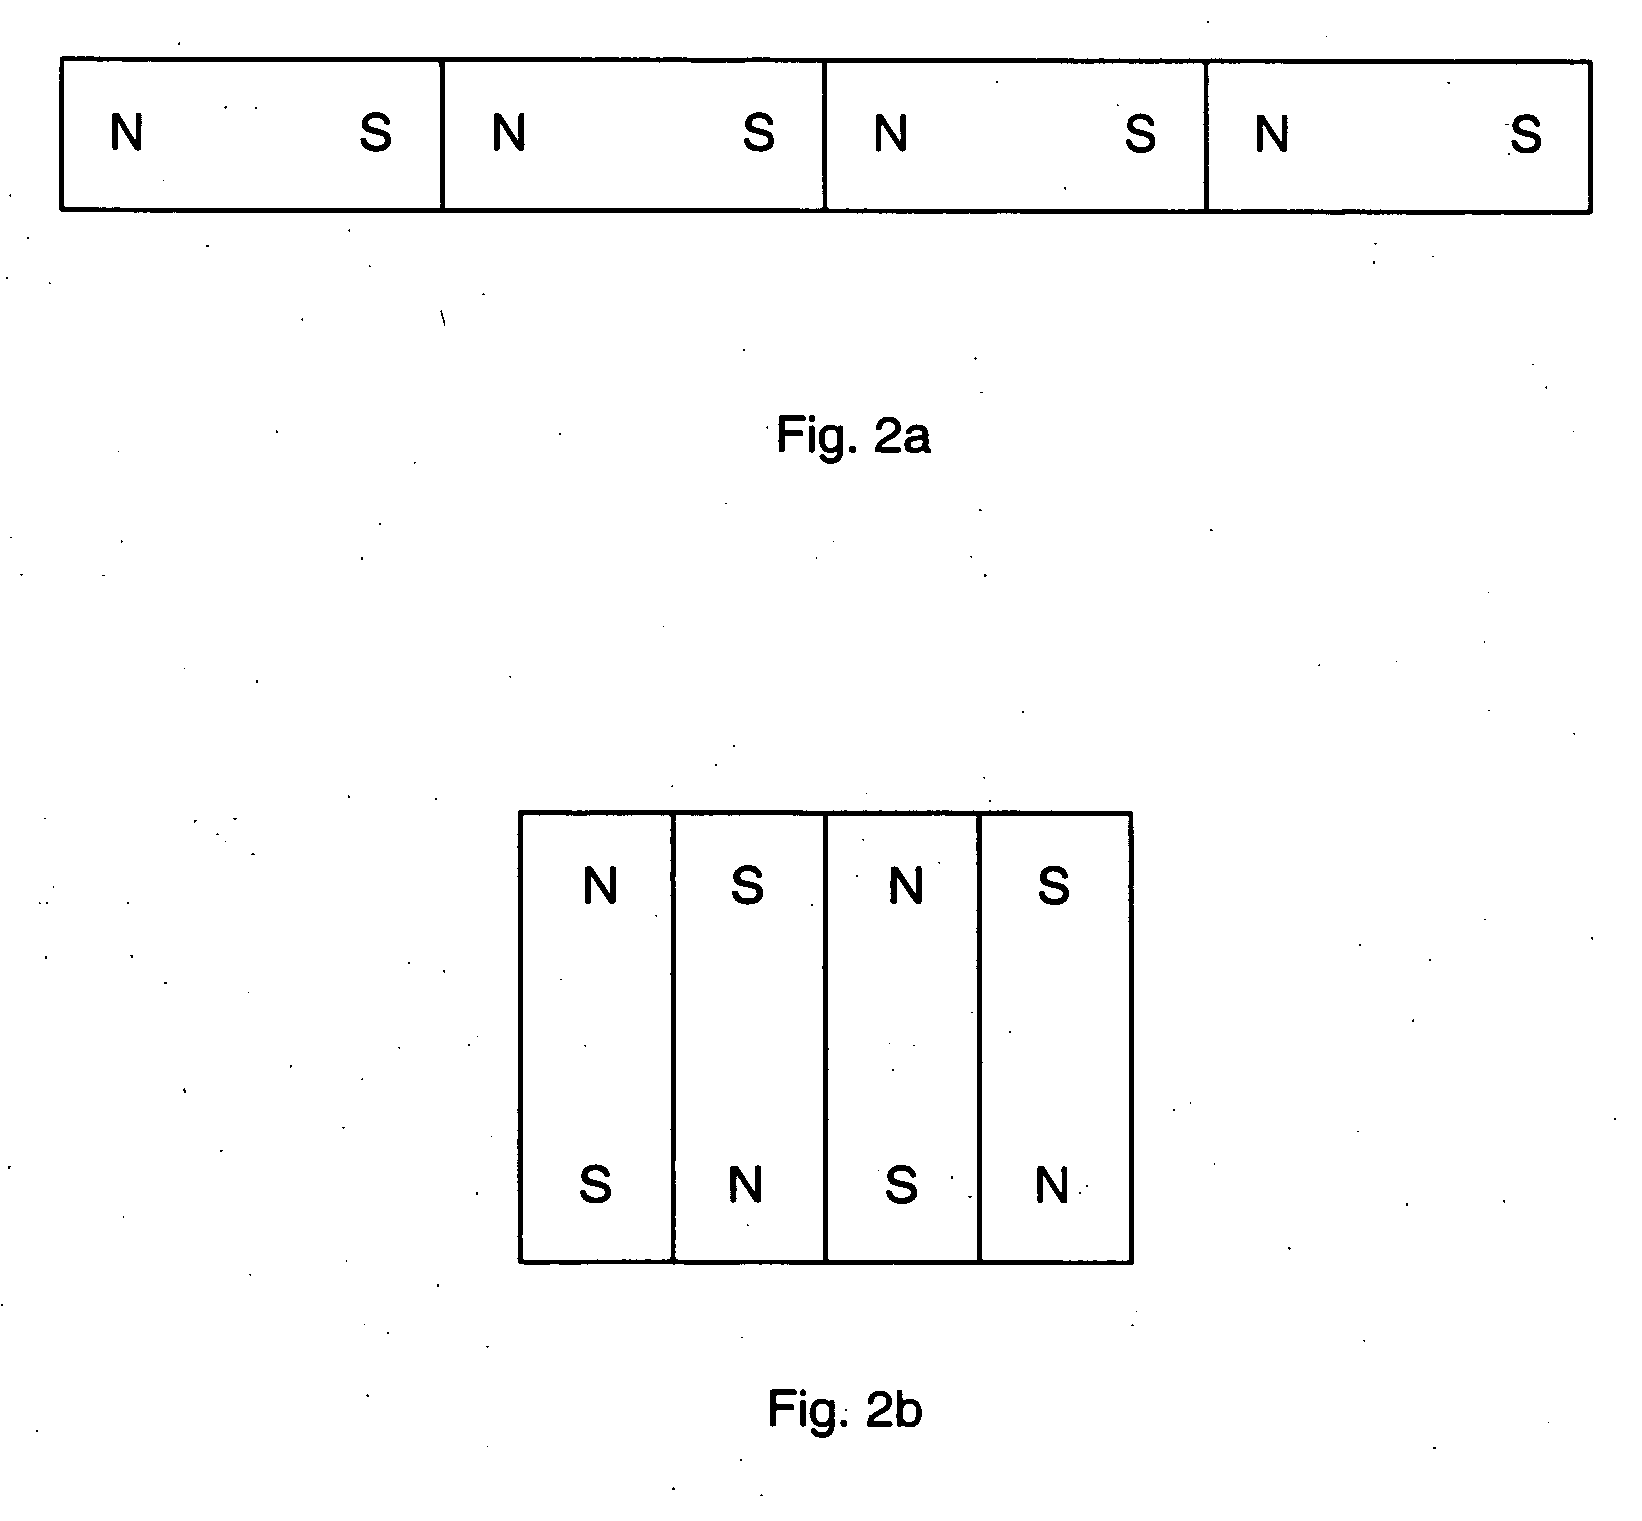 Superconducting carbon 12 atomic strings and methods of manufacture of cables containing parallel strings